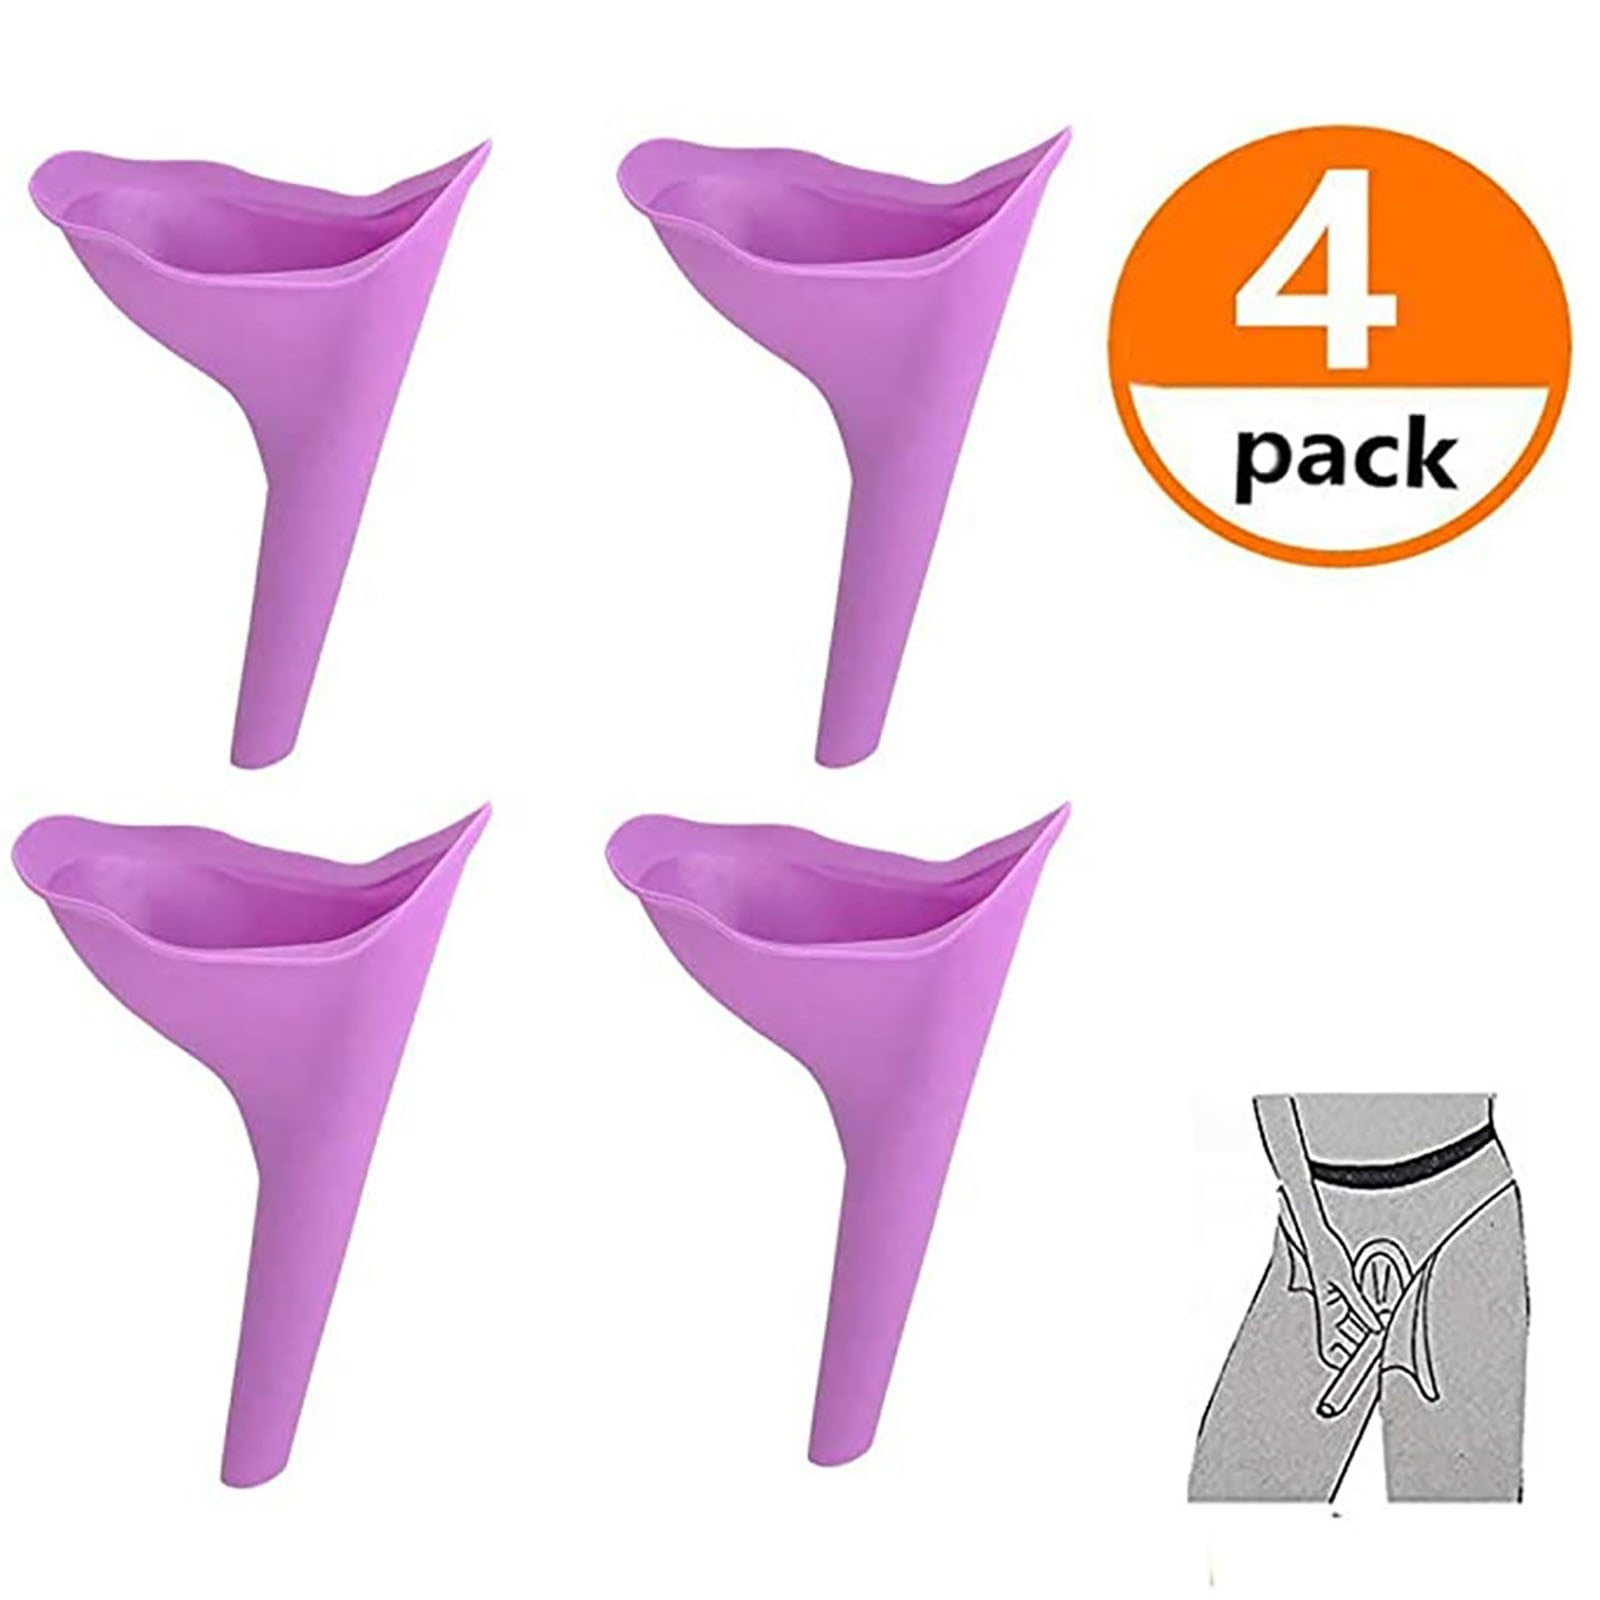 Female Women Urinal Toilet Funnel Camping Travel Stand Pee Device SU 